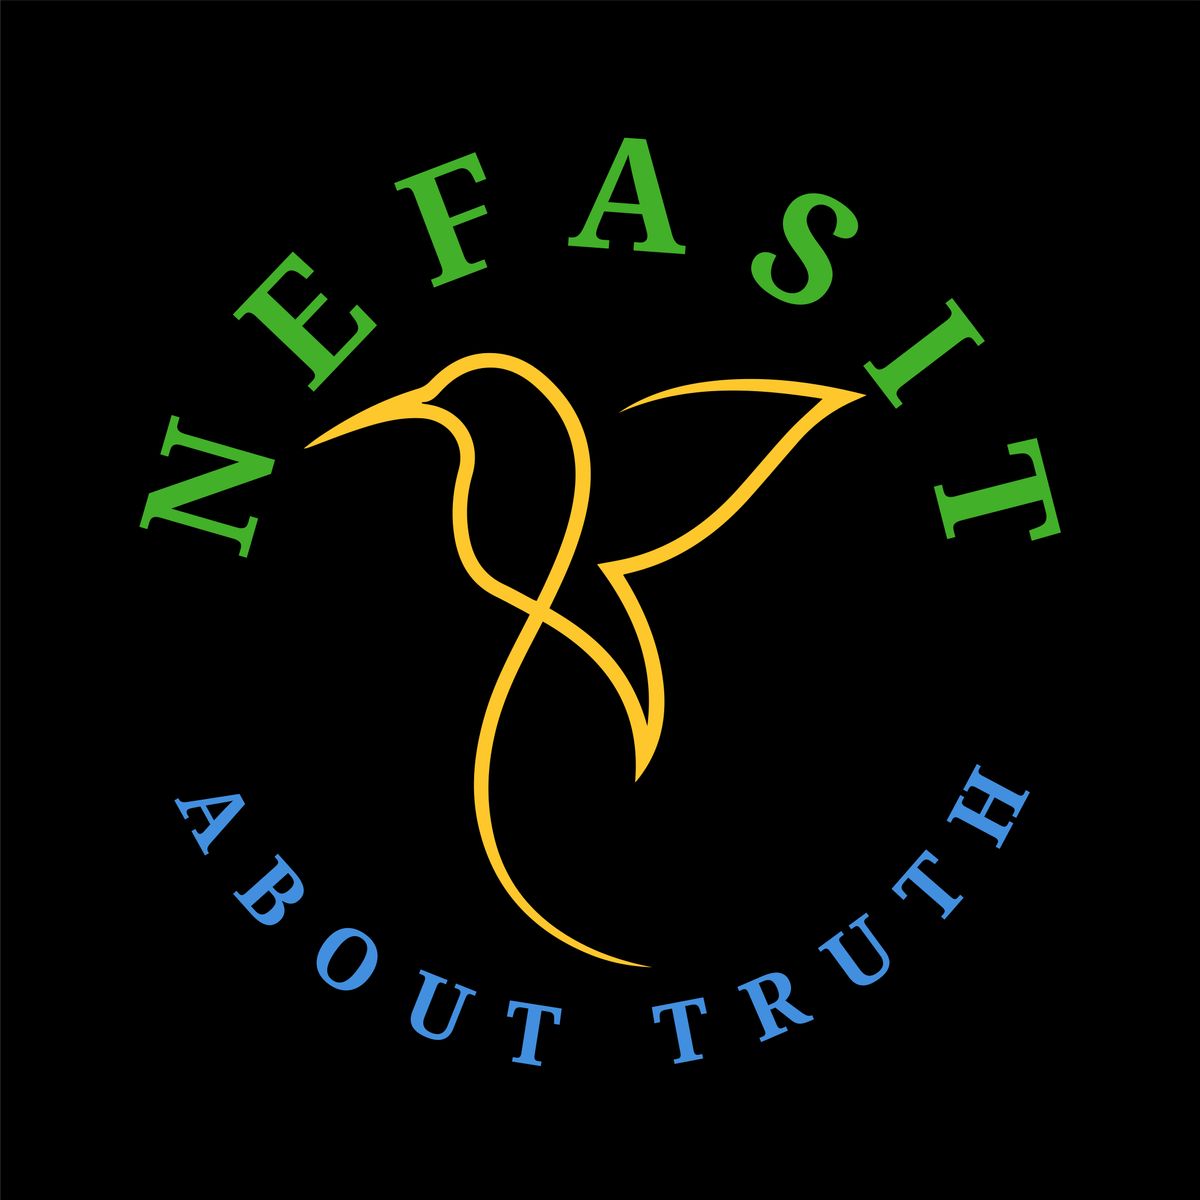 Nefasitpost.Com Launches a New Media Platform for Eritrea, the Horn of Africa, and Africa.